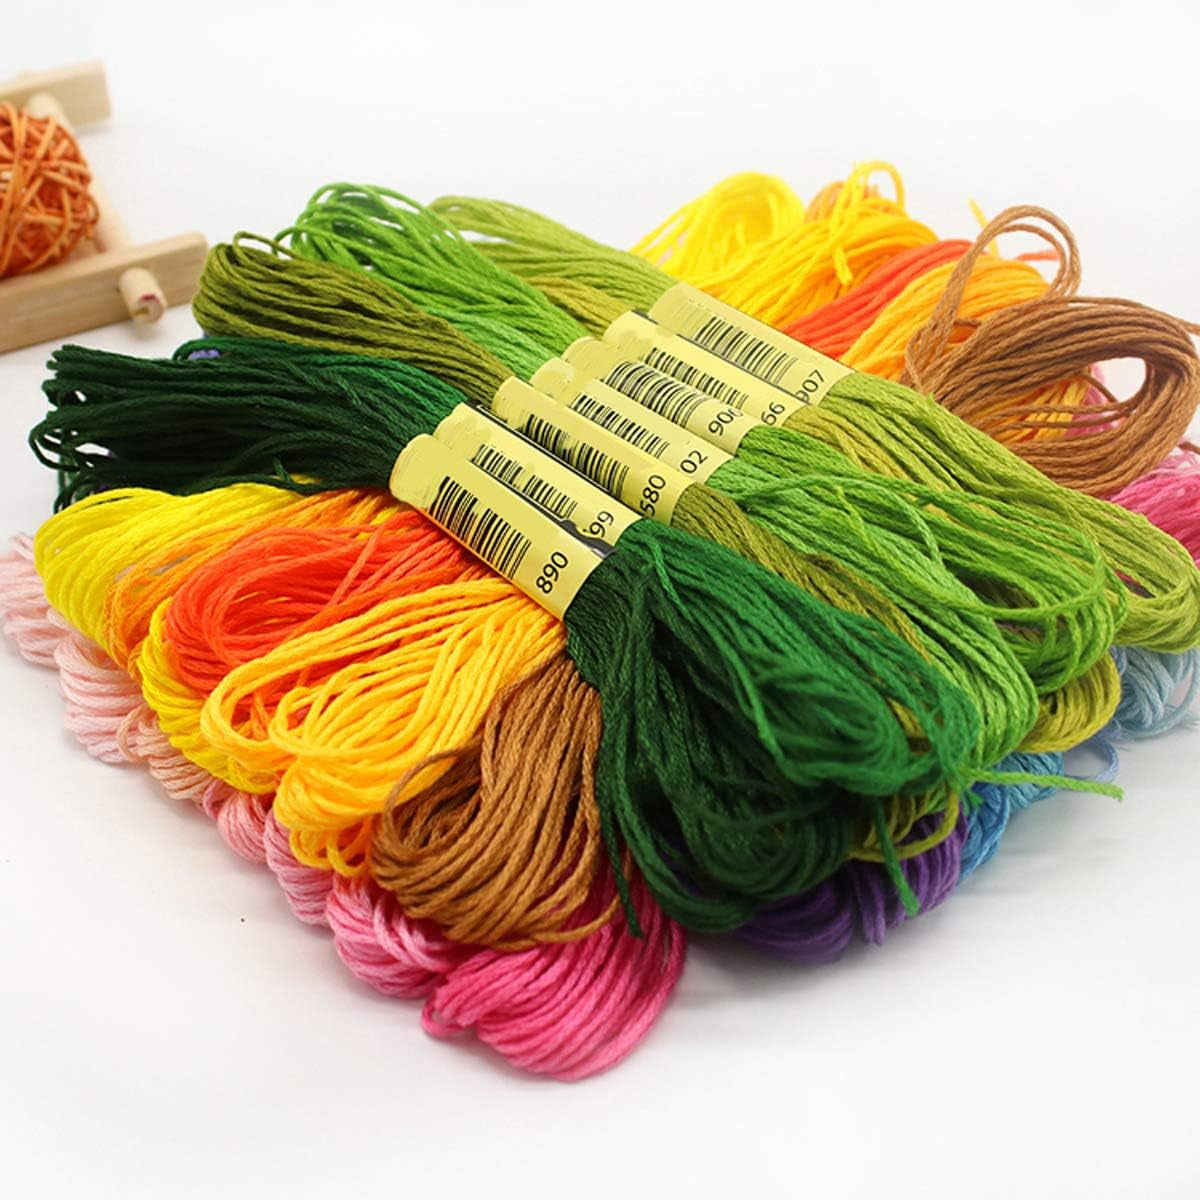 Friendship Bracelet String 50 Skeins Rainbow Color Embroidery Floss Cross Stitch Embroidery Thread Cotton Floss Bracelet Yarn, Craft Floss